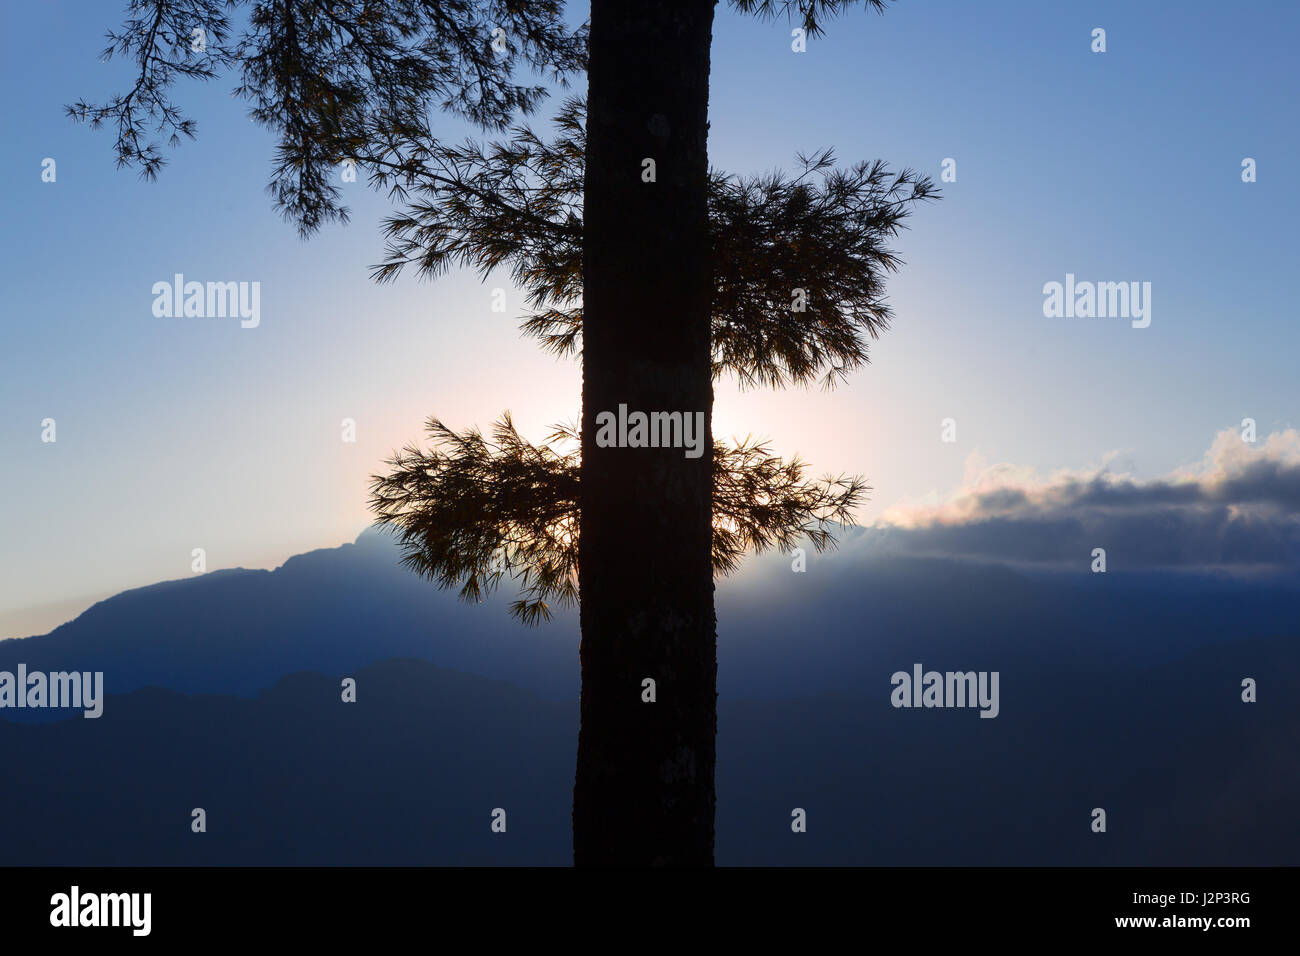 Close up of a cypress tree against early morning rising sun, making perfect silhouette shape against  background of dark mountains and blue sky with f Stock Photo